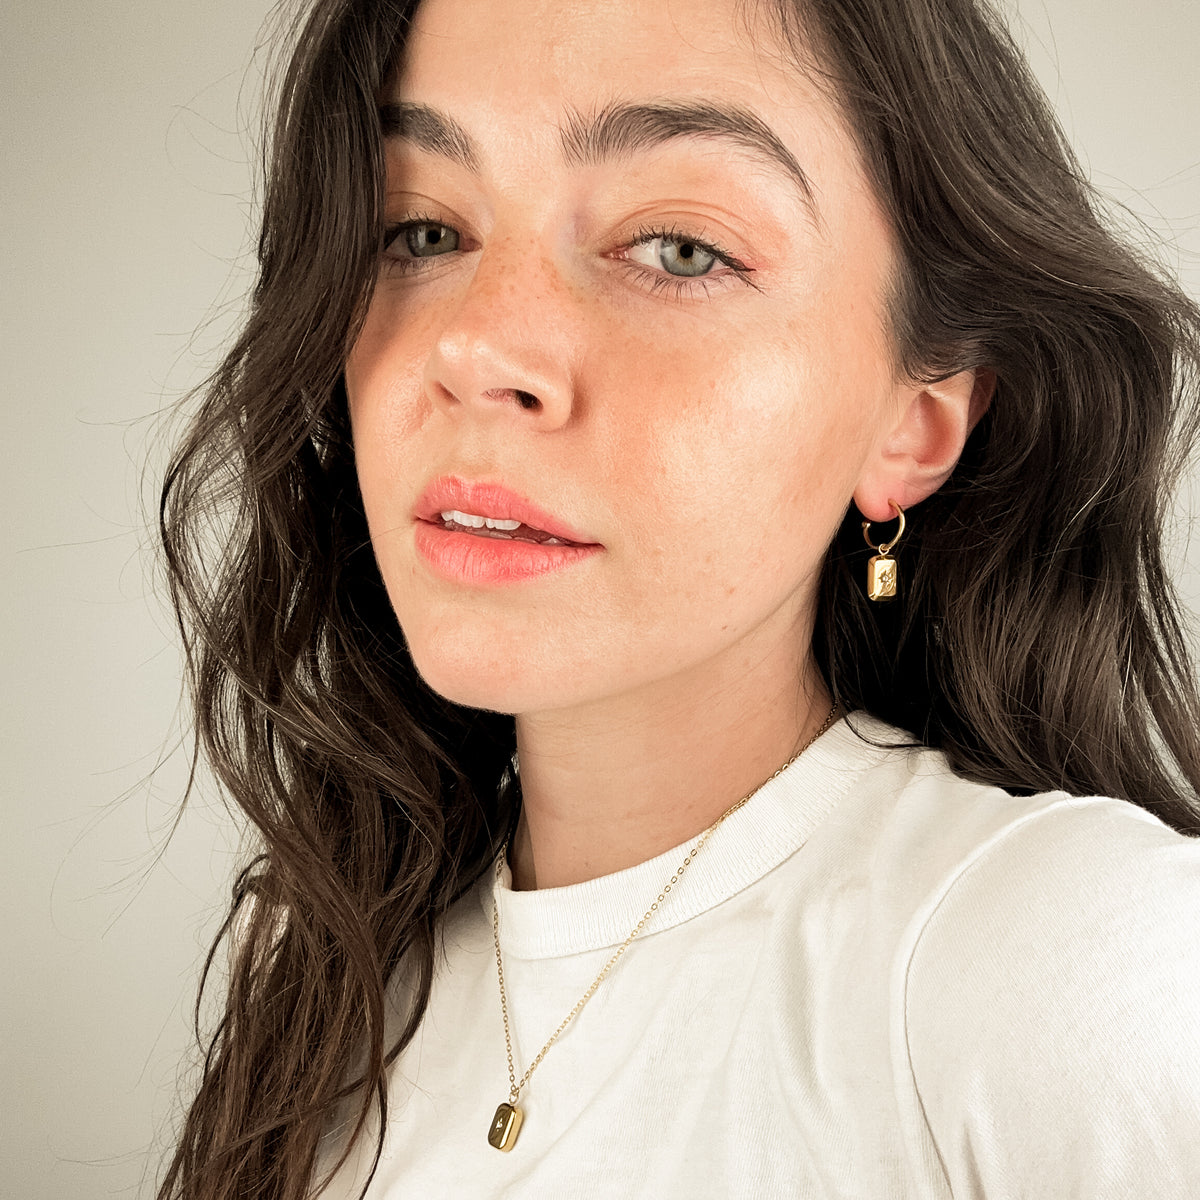 model is wearing gold earrings with a delicate dangling charm. the charm can be removed also and the earrings can be worn as simple hoops. The charm that hangs on the hoop is embellished with a star. the model is also wearing the matching poise necklace. 